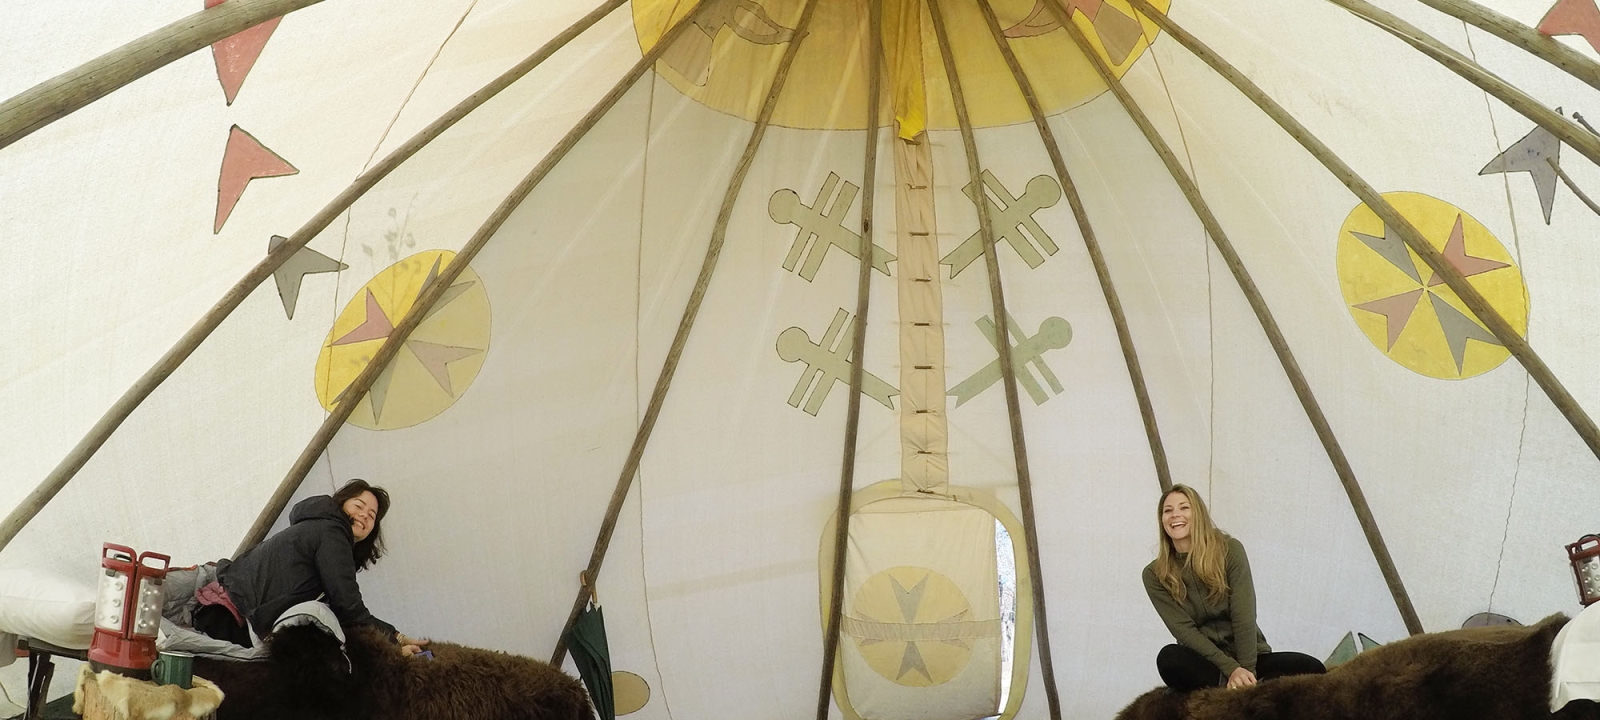 Wanuskewin’s Tipi Experience: Staying Overnight with New York Times Travel Writer Jada Yuan